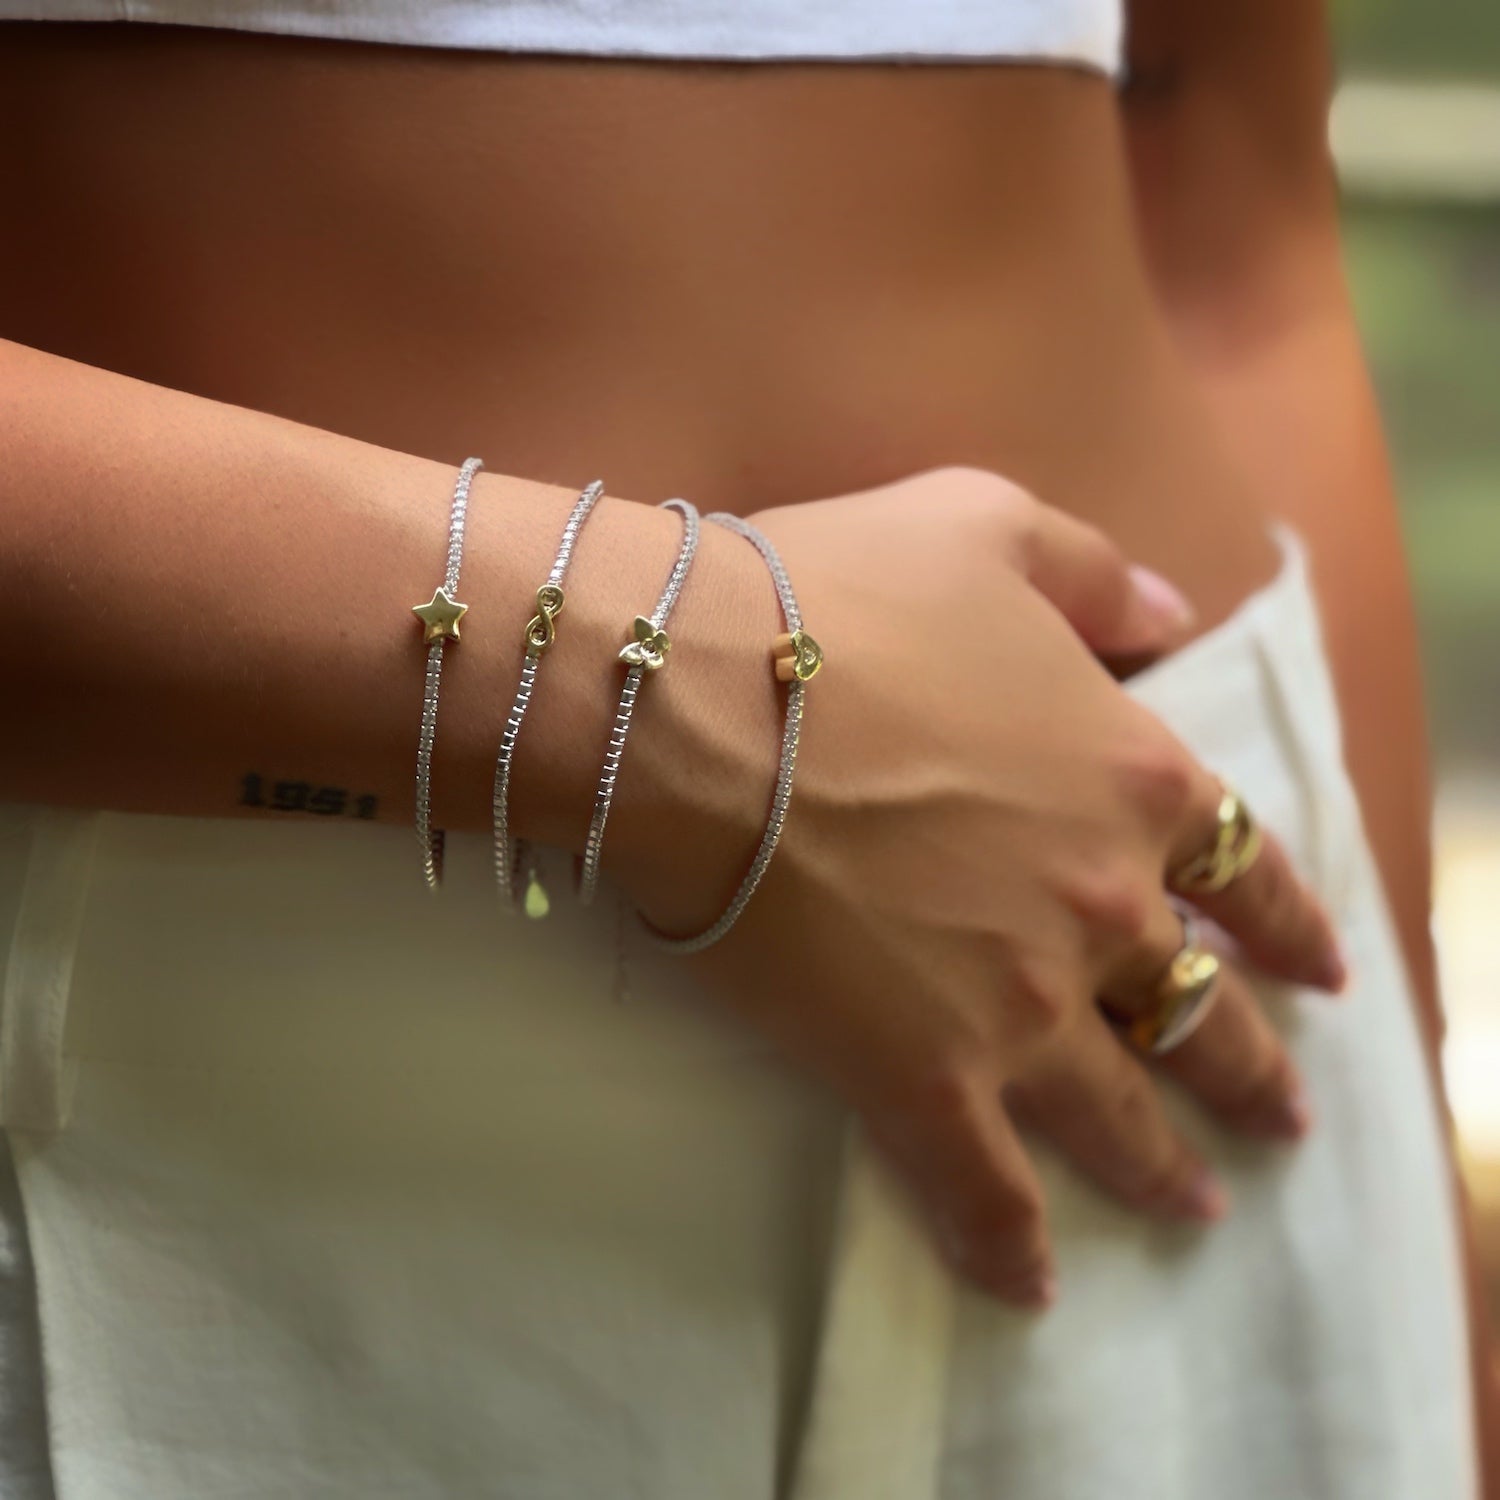 Love and allure: Model enhances her style with Gold Heart Bracelet.